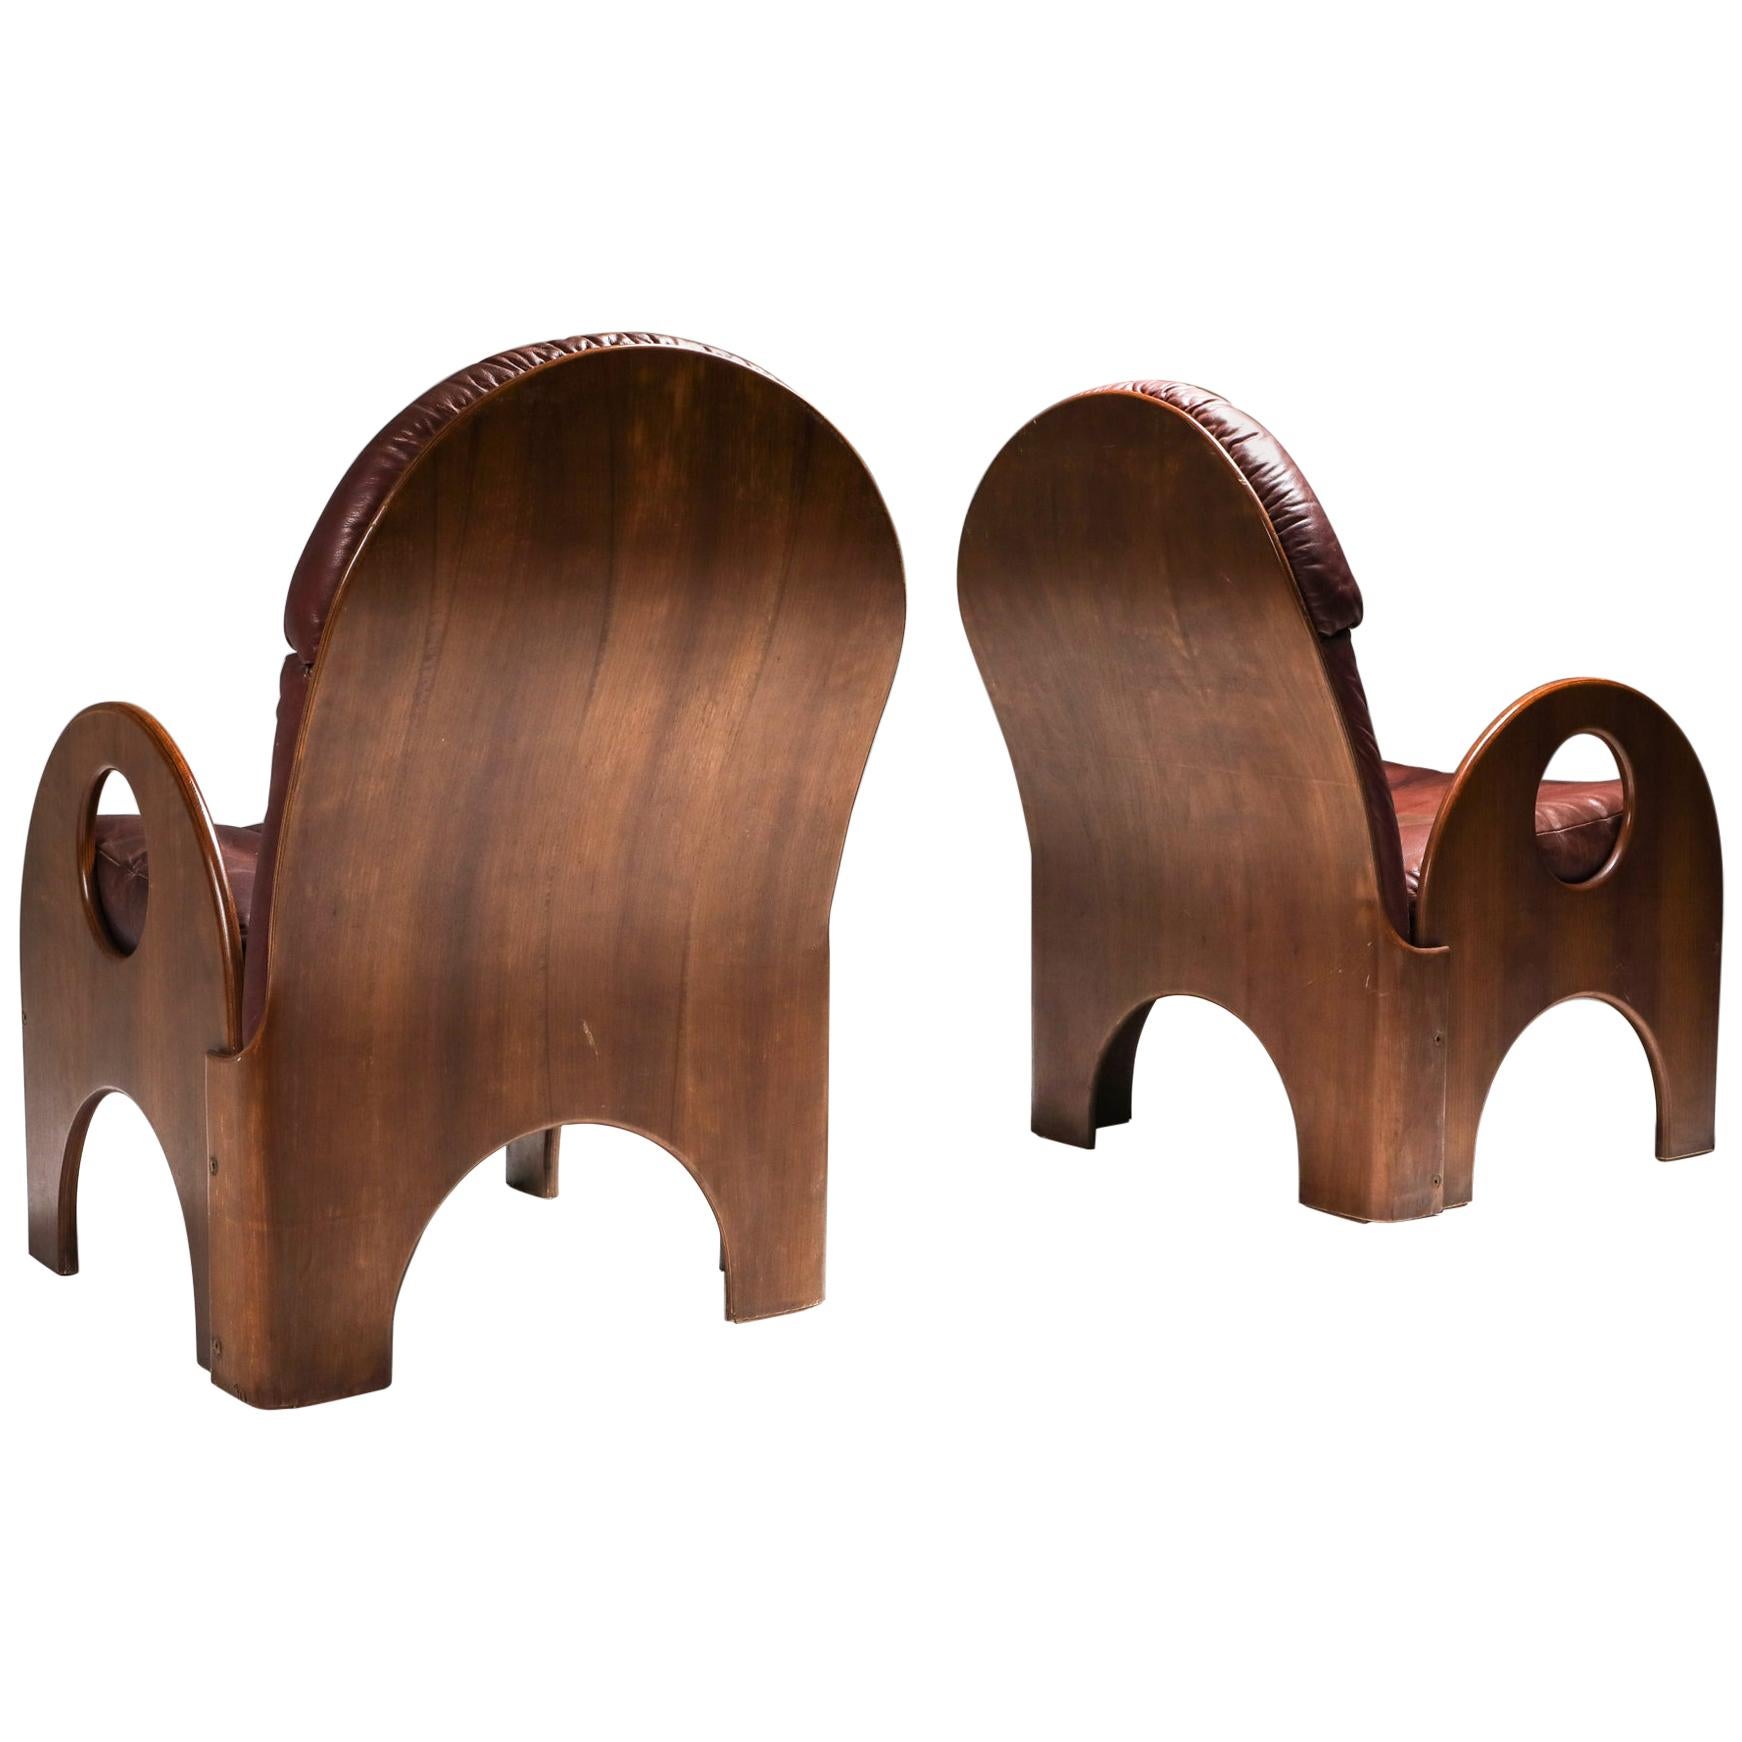 Gae Aulenti Pair of "Arcata" Easy Chairs in Walnut and Burgundy Leather